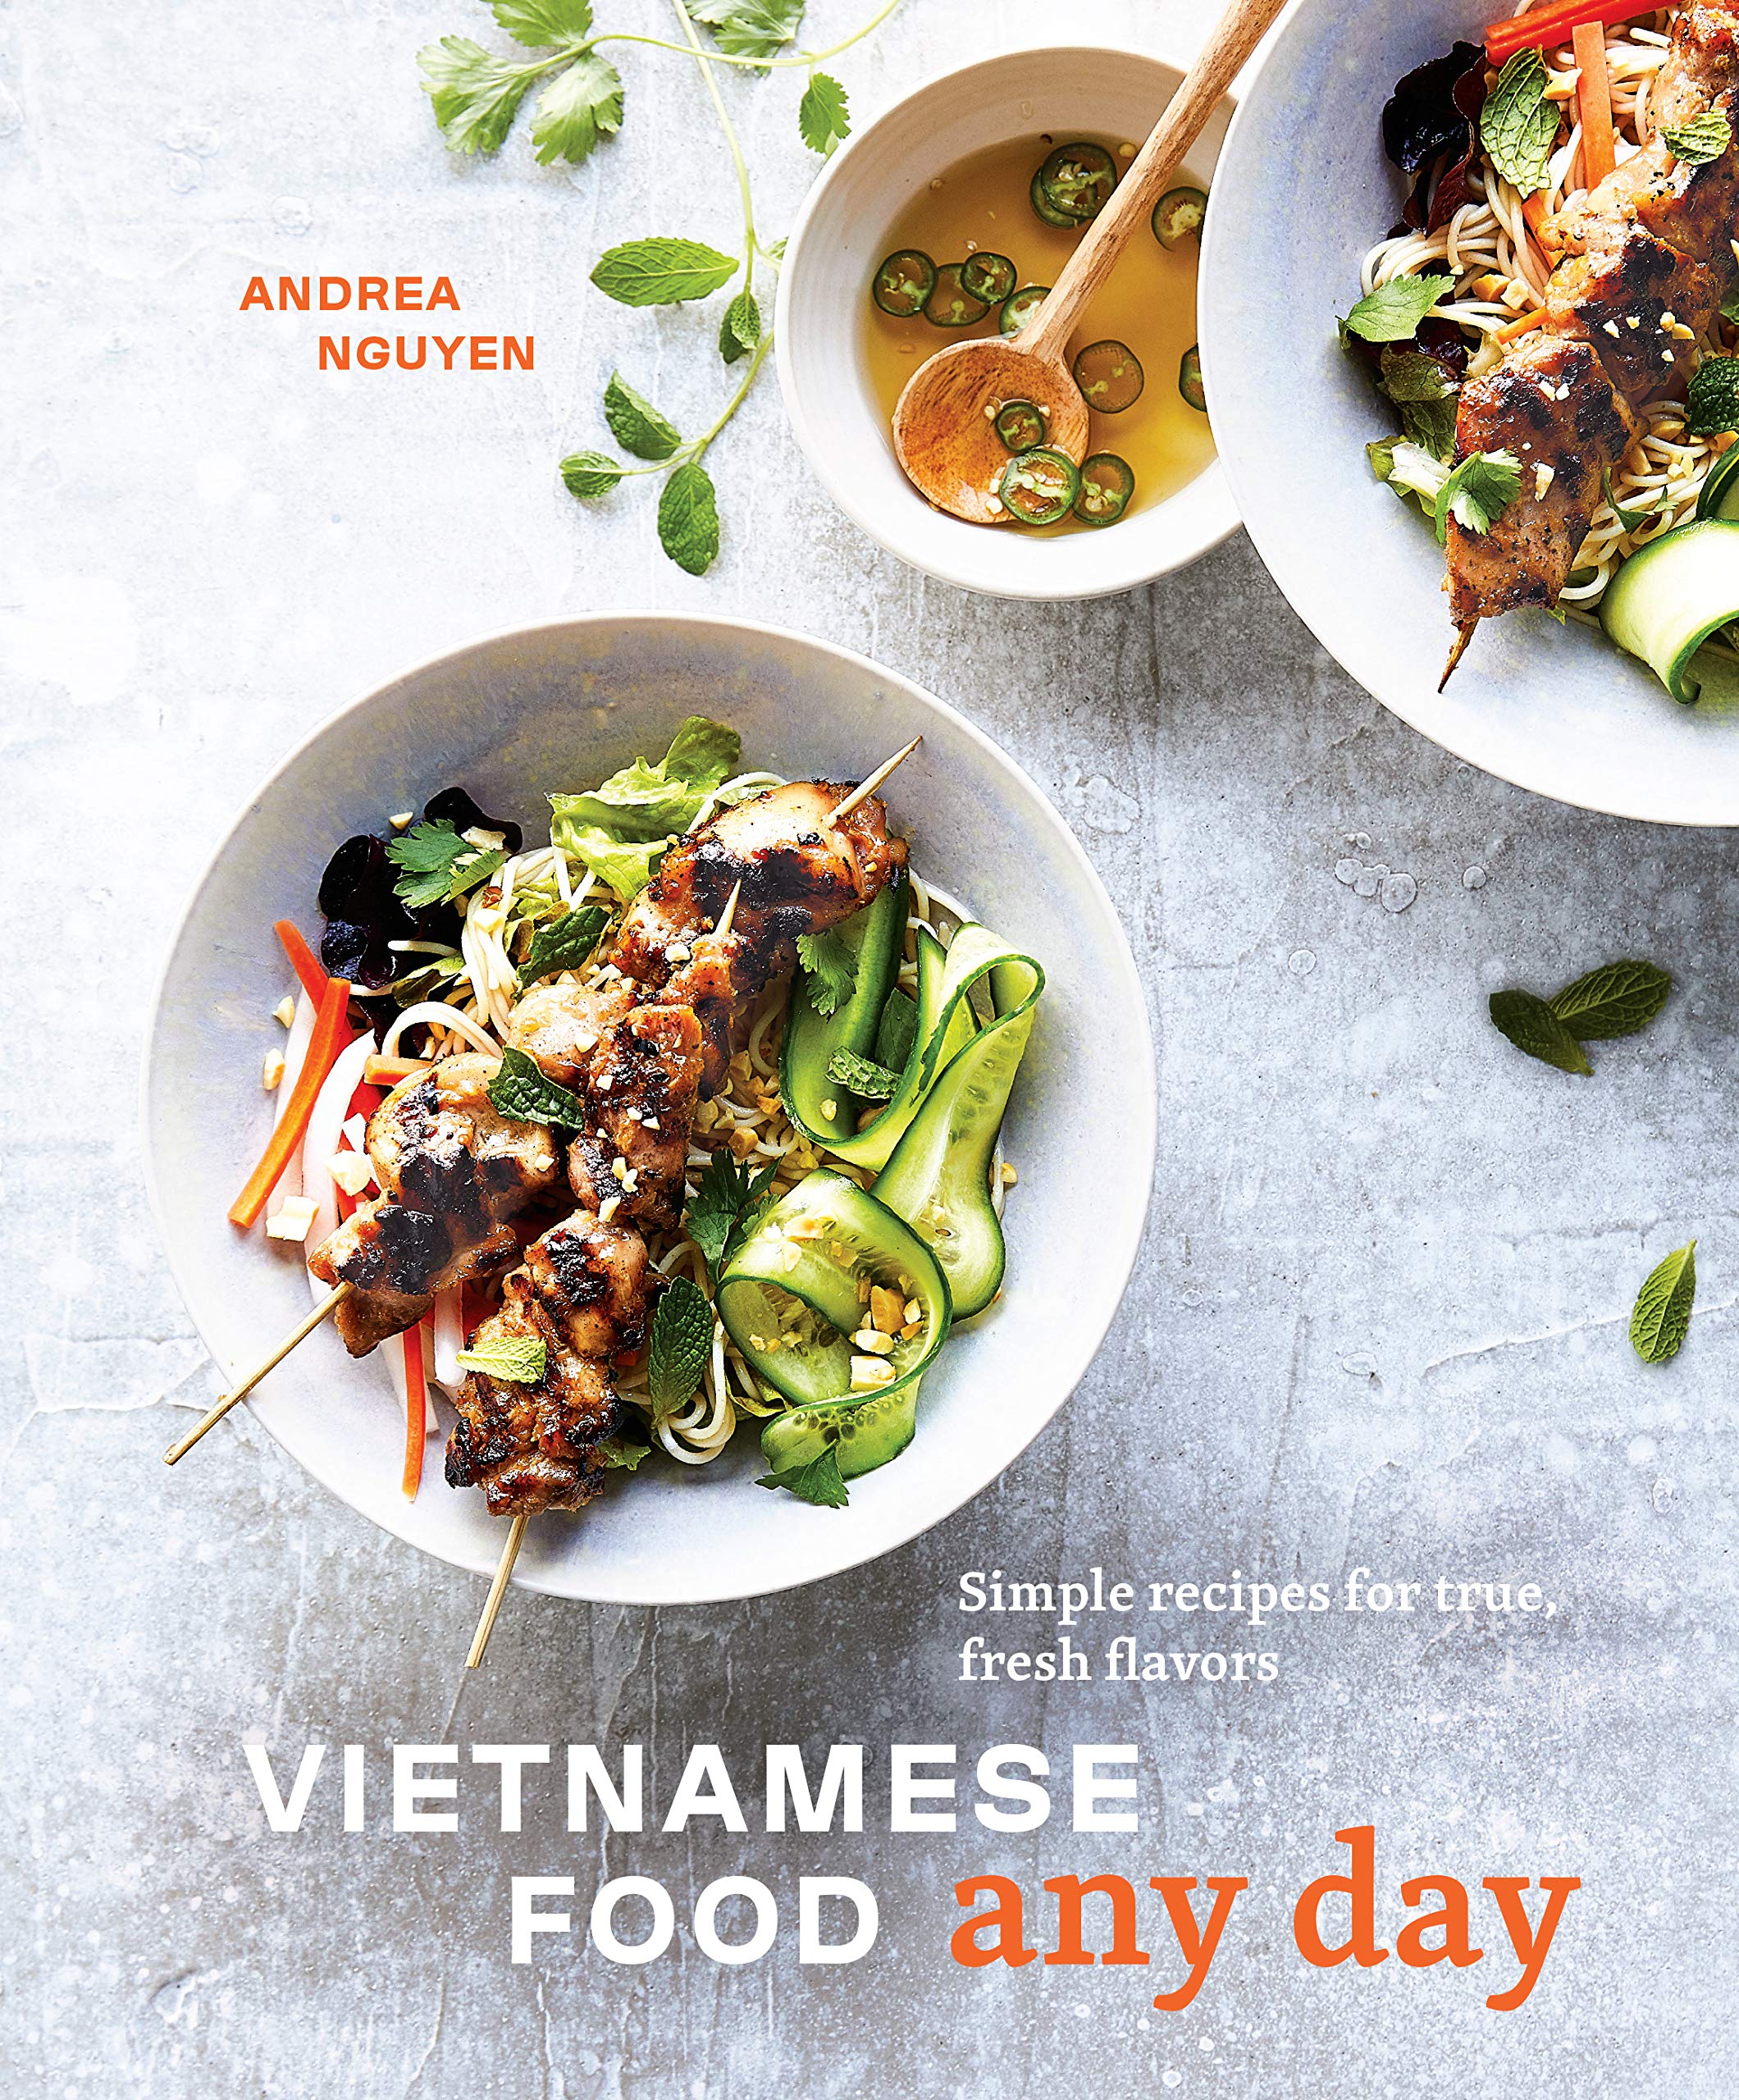 Vietnamese Food Any Day: Simple Recipes for True, Fresh Flavors (Andrea Nguyen) *Signed*